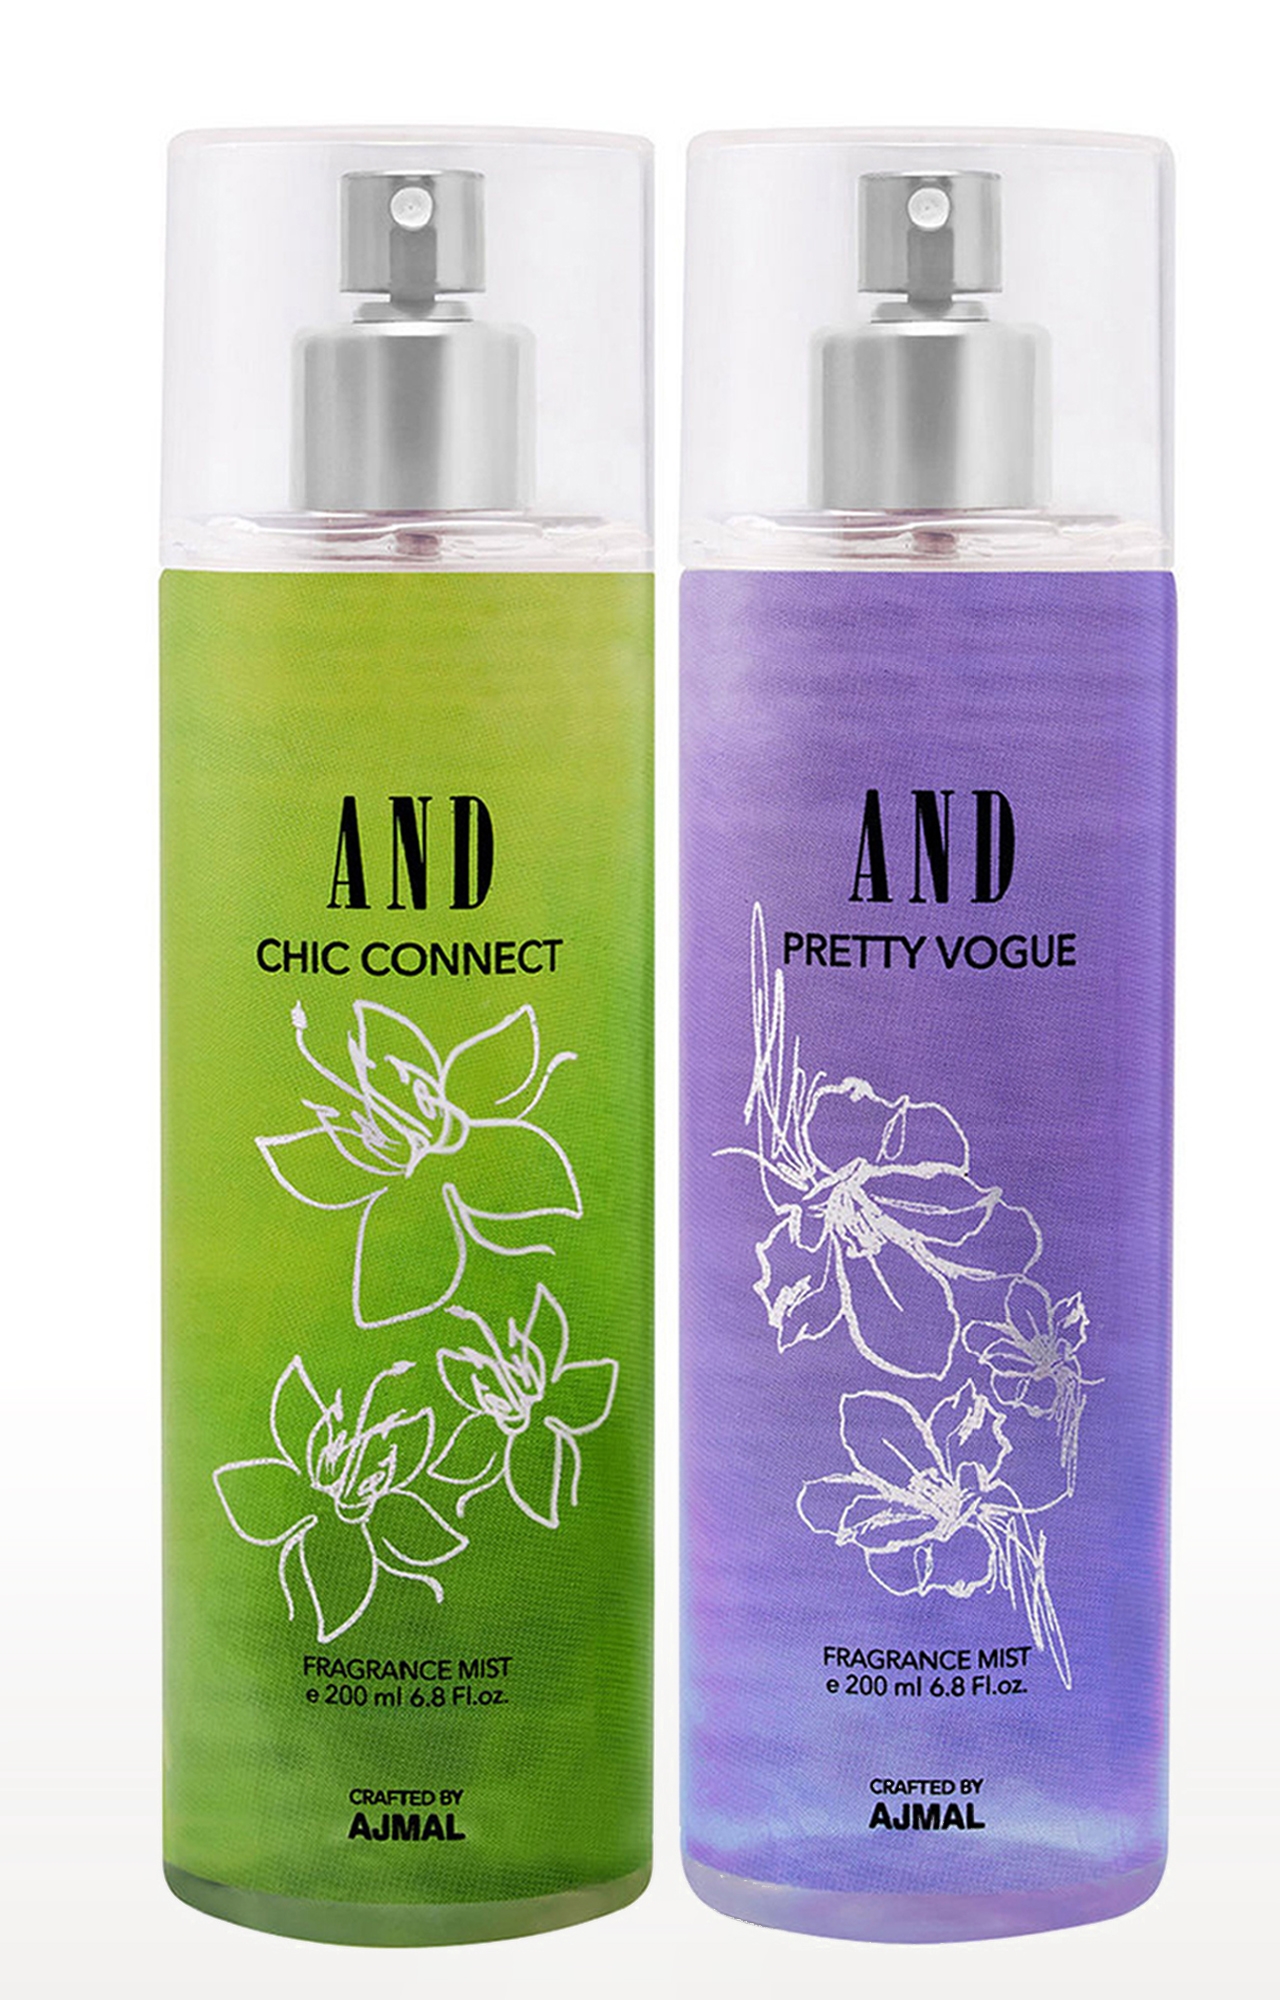 AND Crafted By Ajmal | AND Chic Connect & Pretty Vogue Pack of 2 Body Mist 200ML each Long Lasting Scent Spray Gift For Women Perfume Crafted by Ajmal FREE